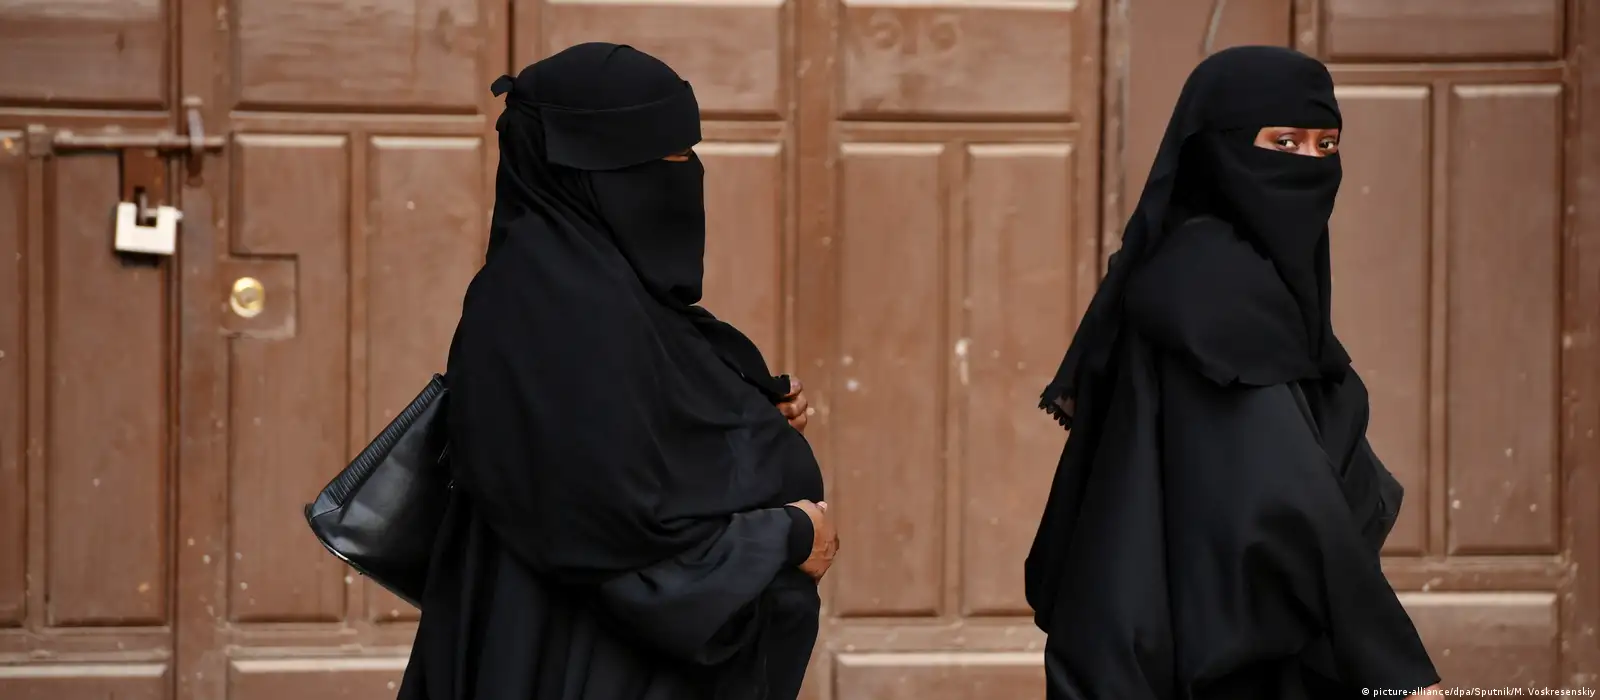 Saudi prince Women should decide what to wear – DW pic pic